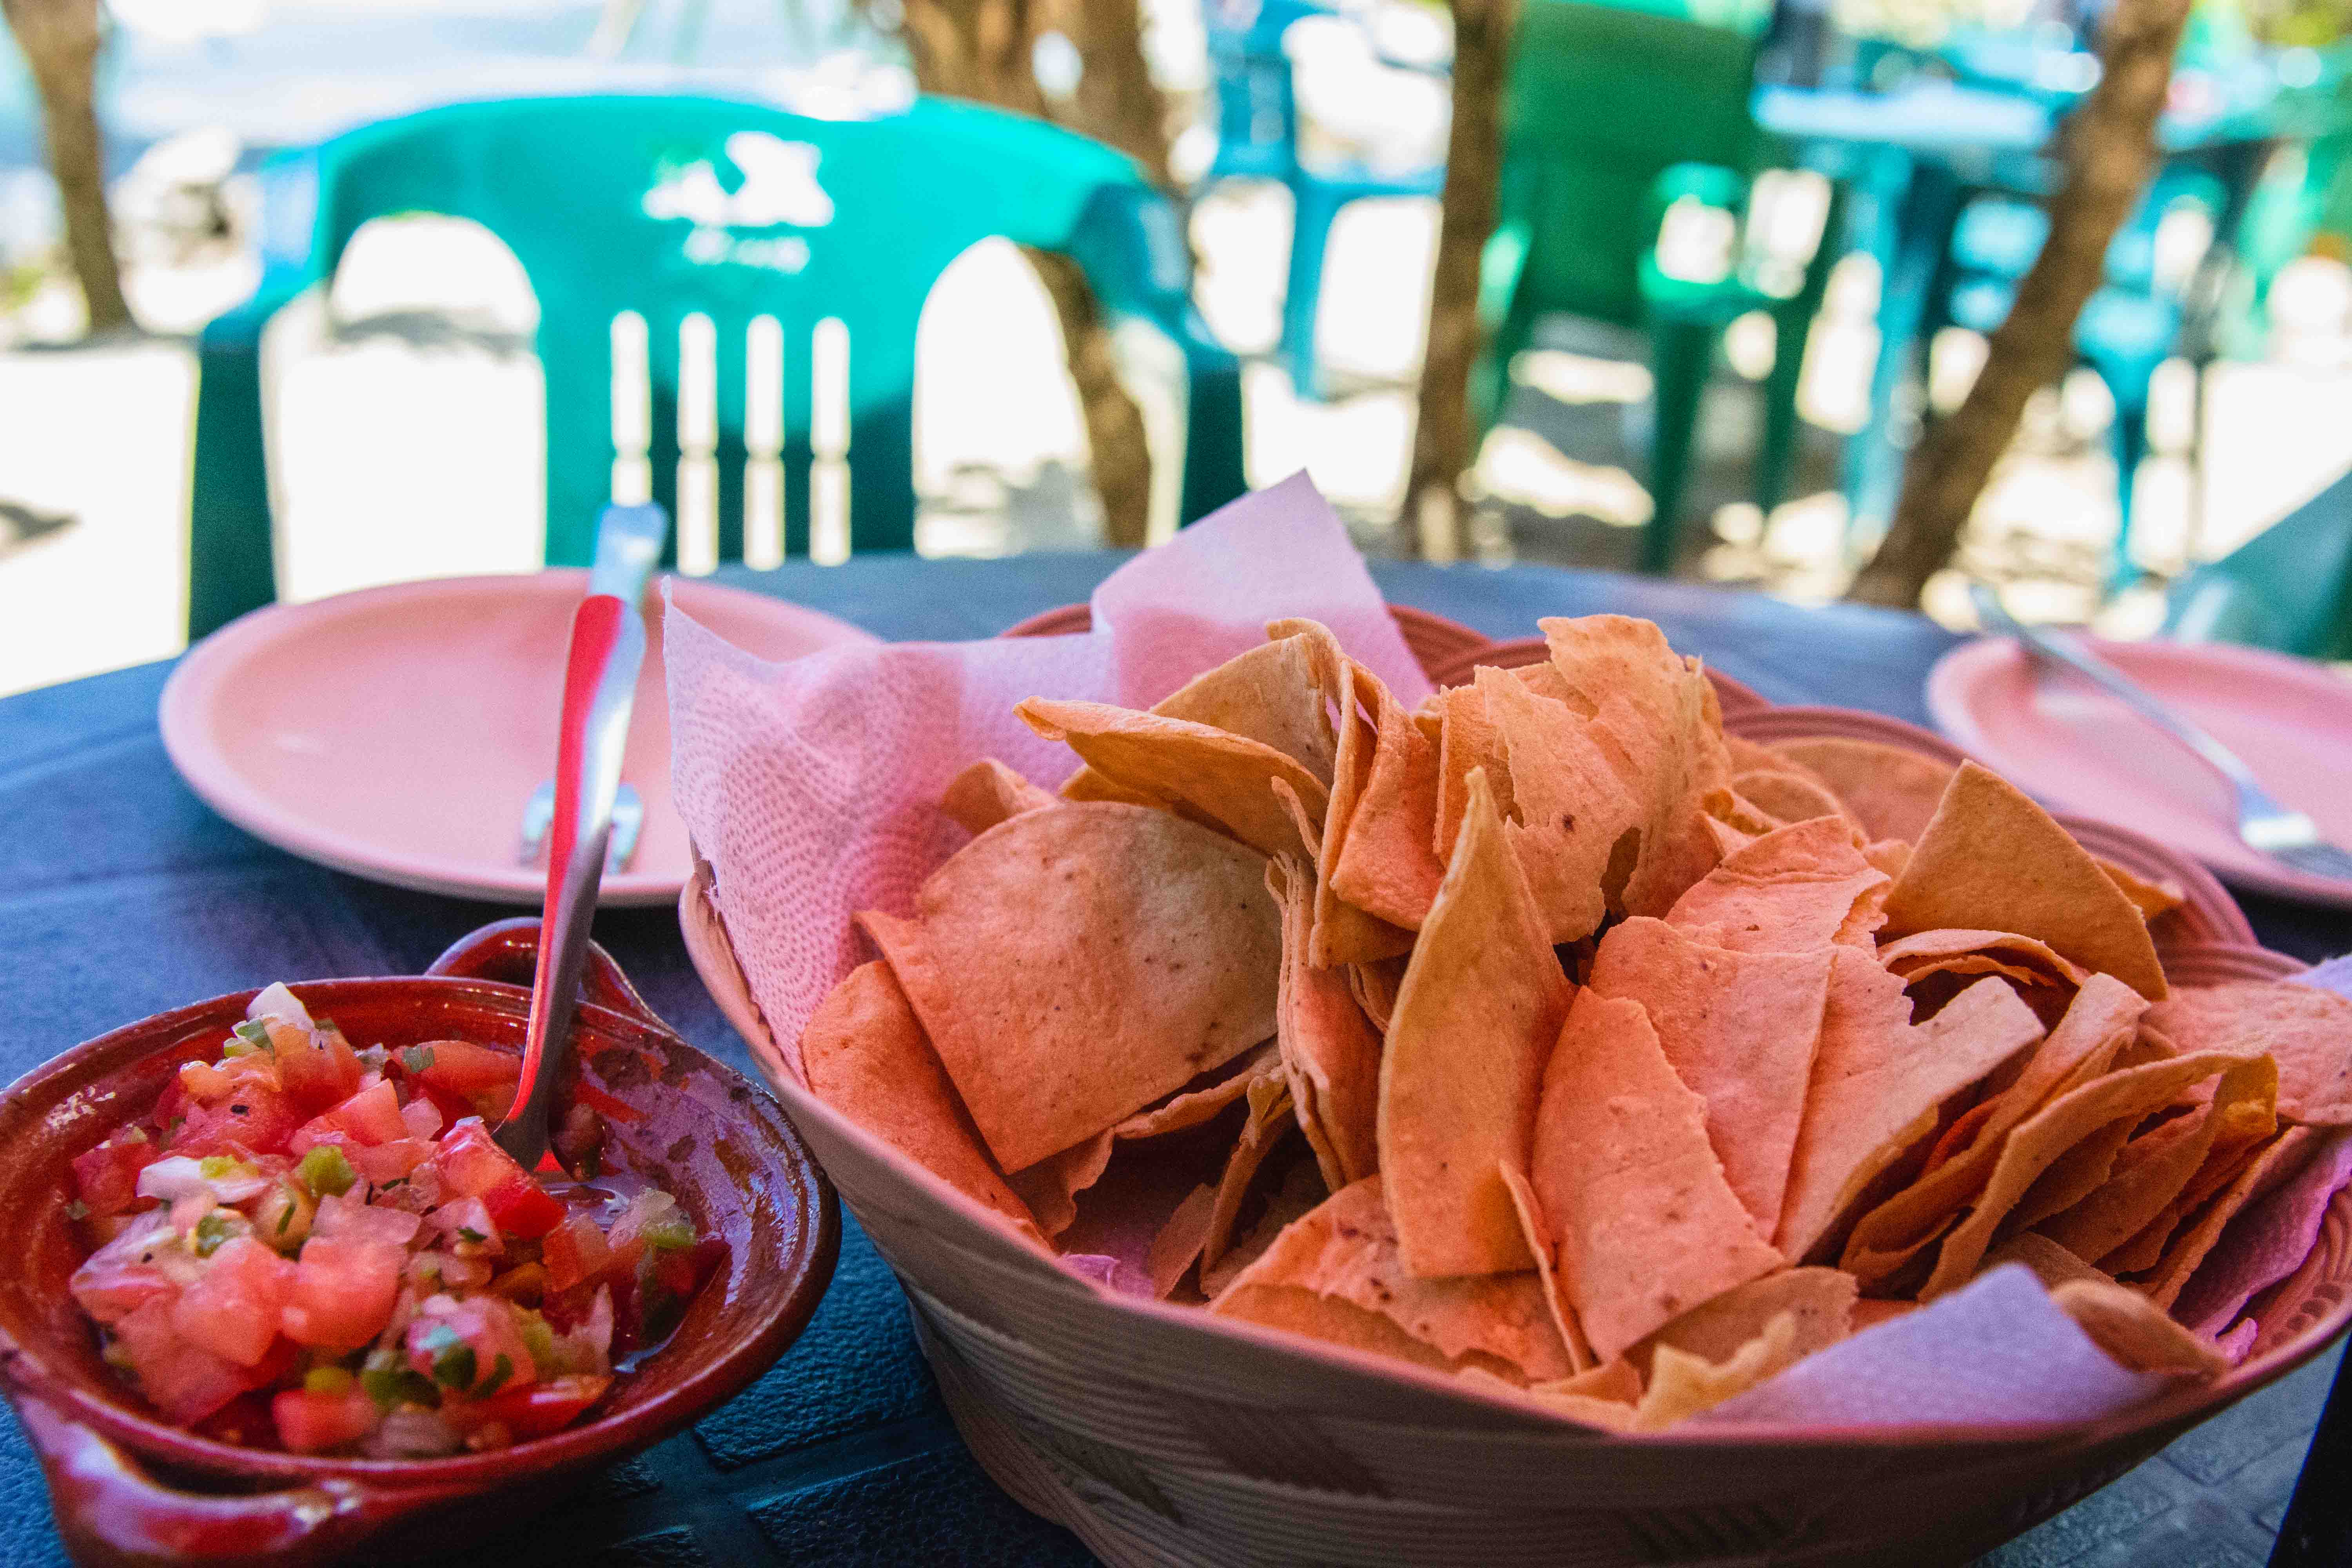 Chips & Salsa at Coconut's Bar & Grill in Cozumel Mexico - ChasingLime.com